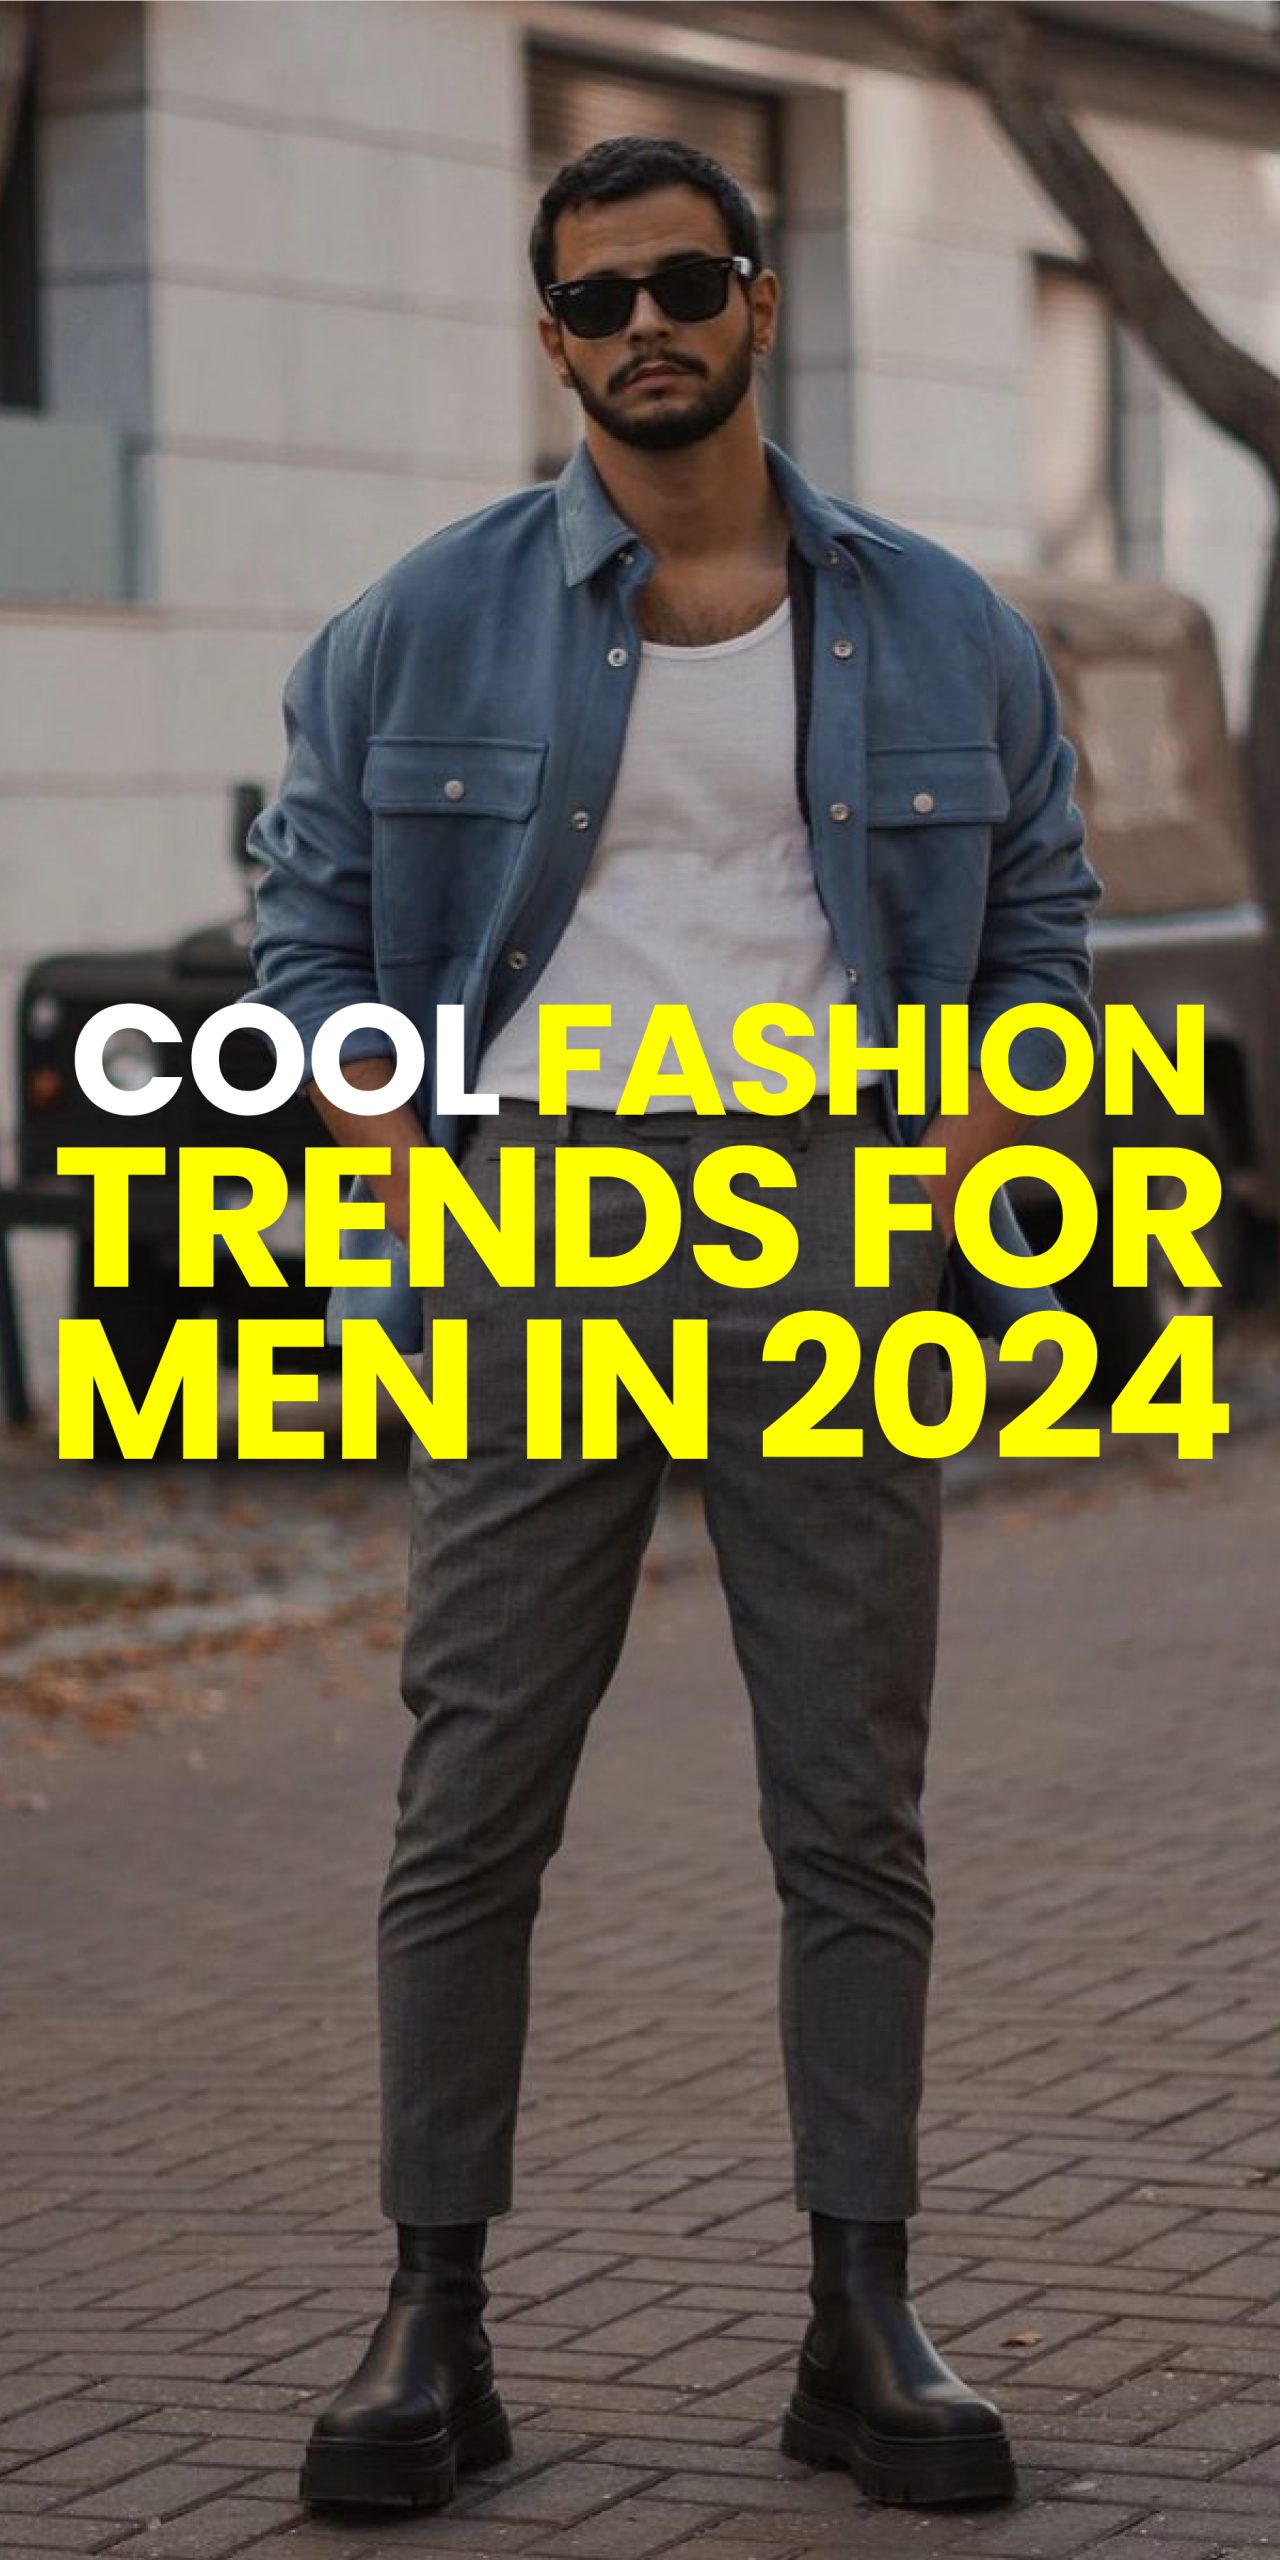 COOL FASHION TRENDS FOR MEN IN 2024